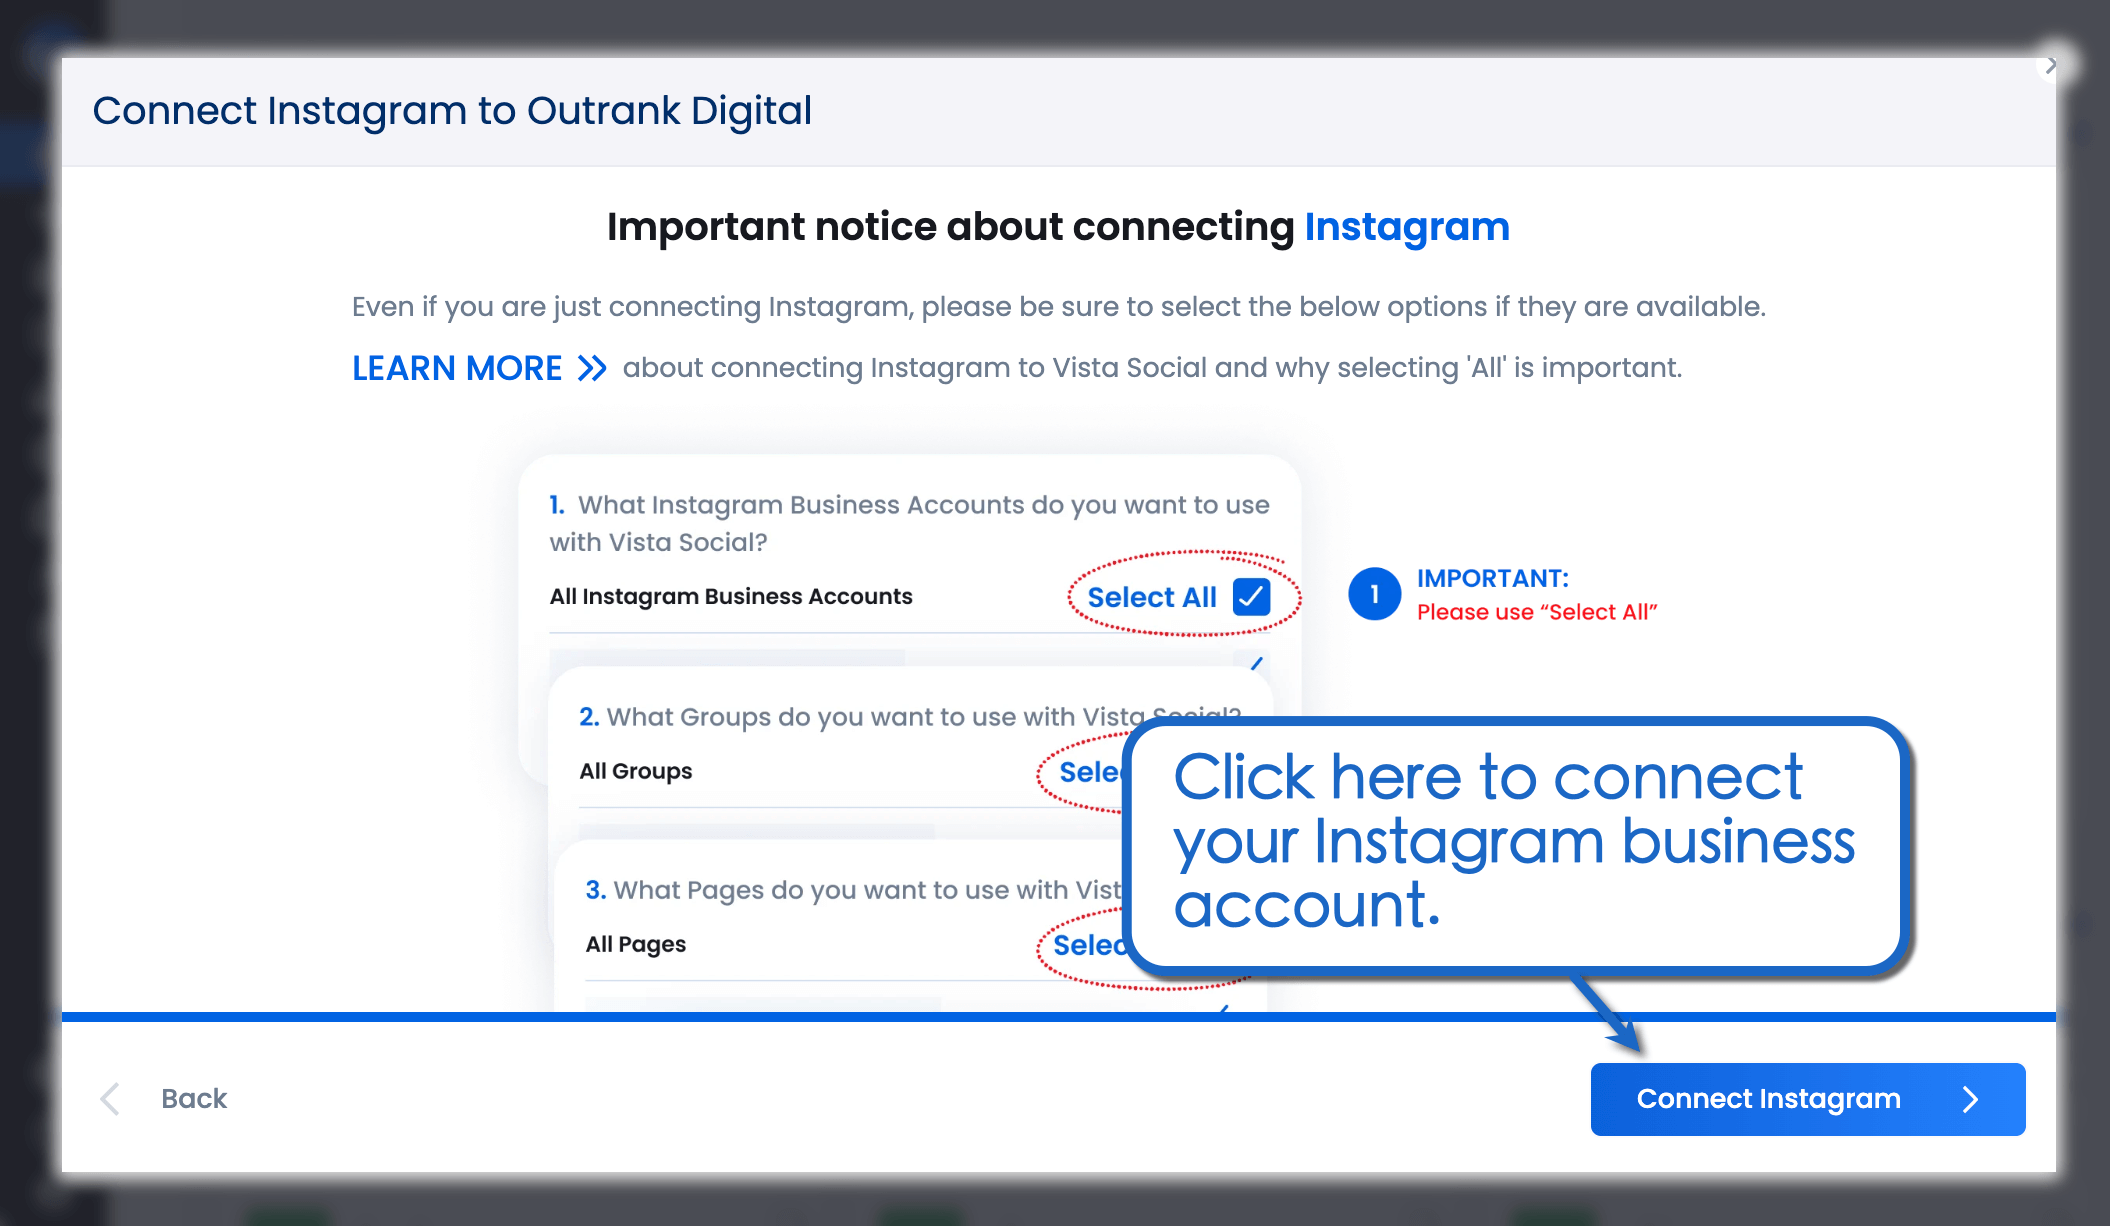 Connect your Instagram Business Profile.